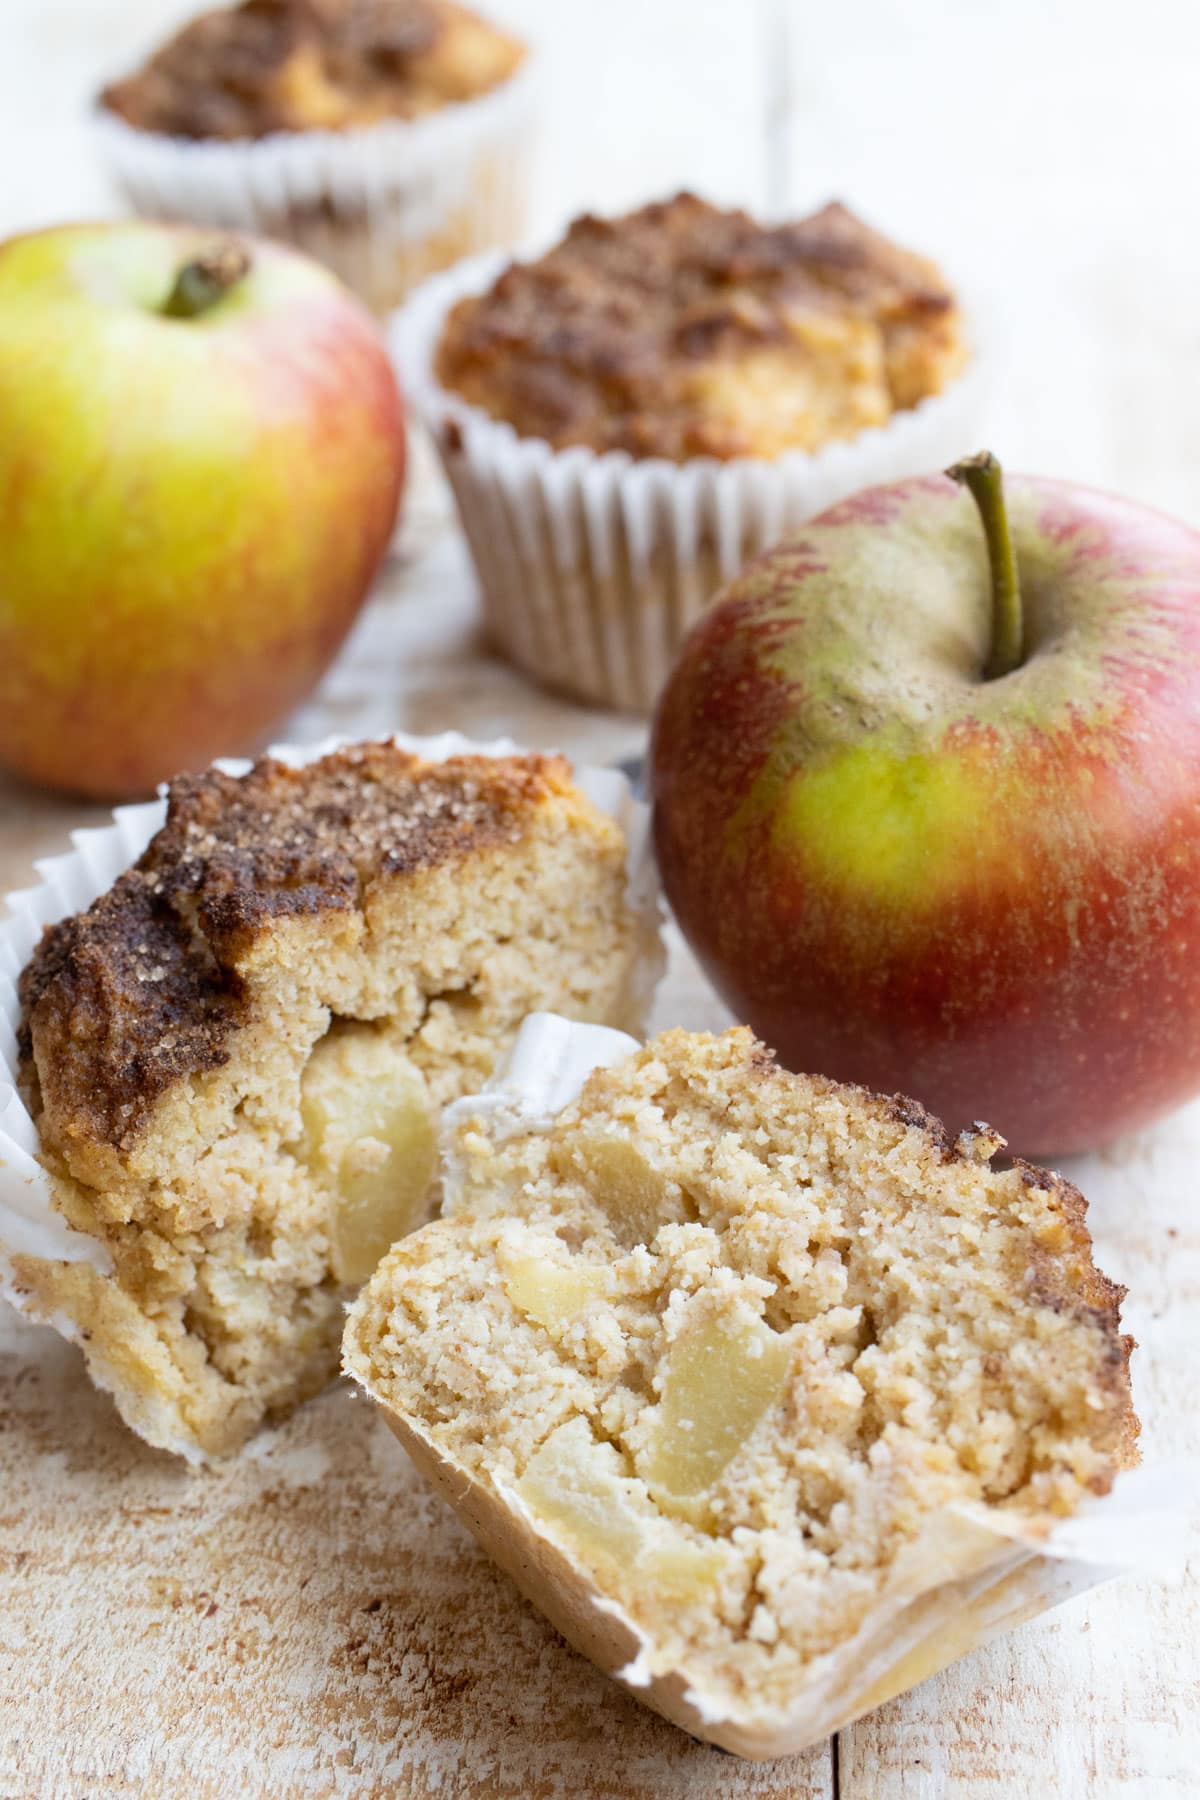 an apple muffin sliced in half showing the inside